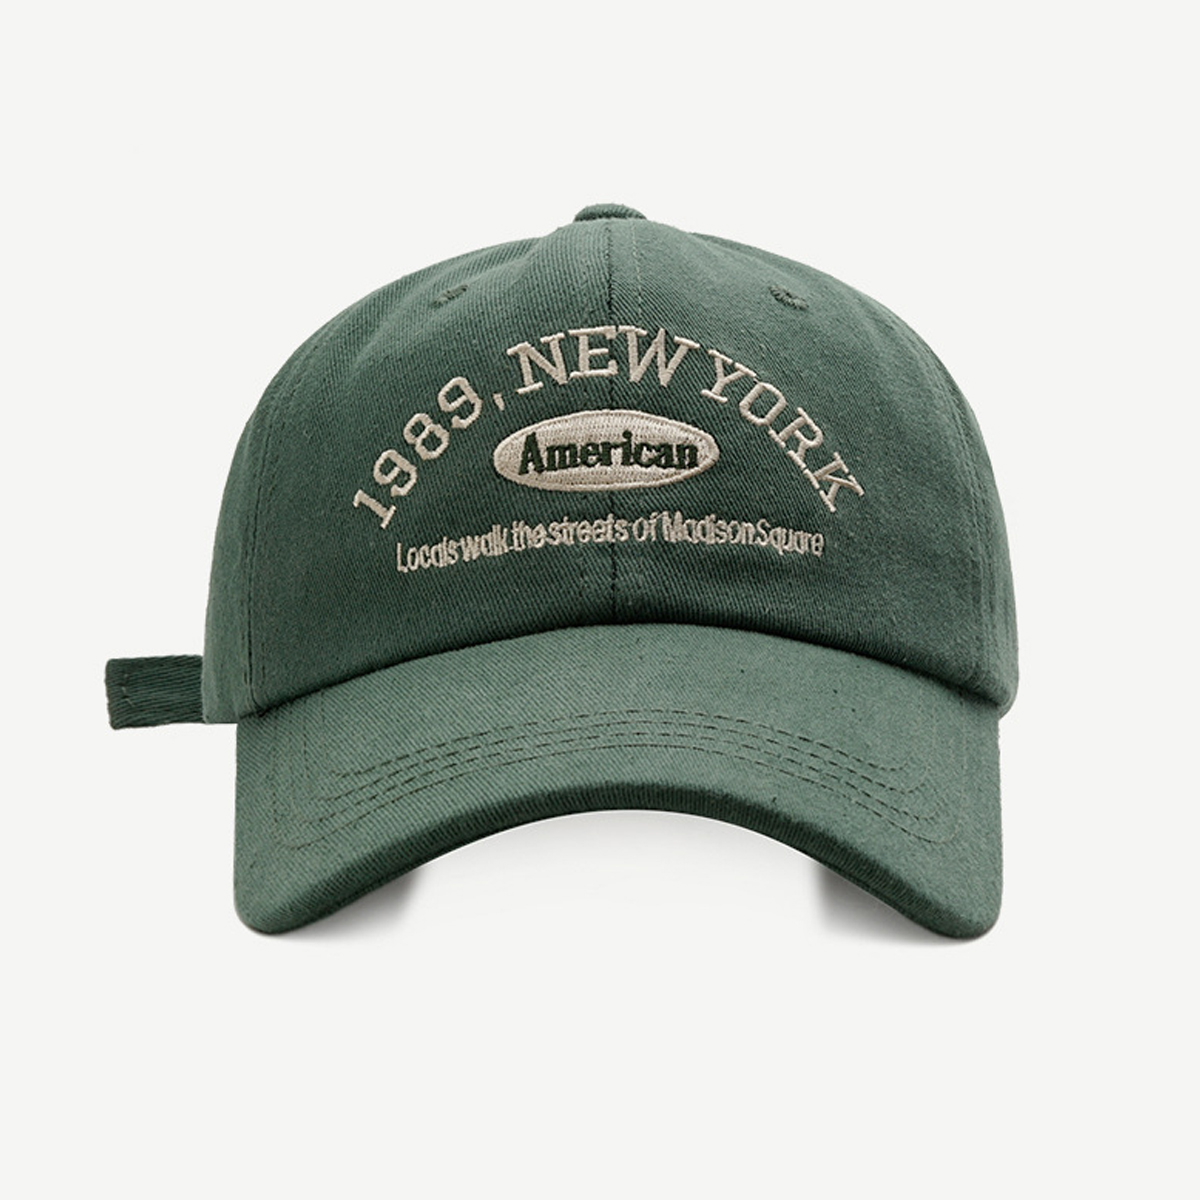 1989 Embroidered Soft Top Baseball Cap